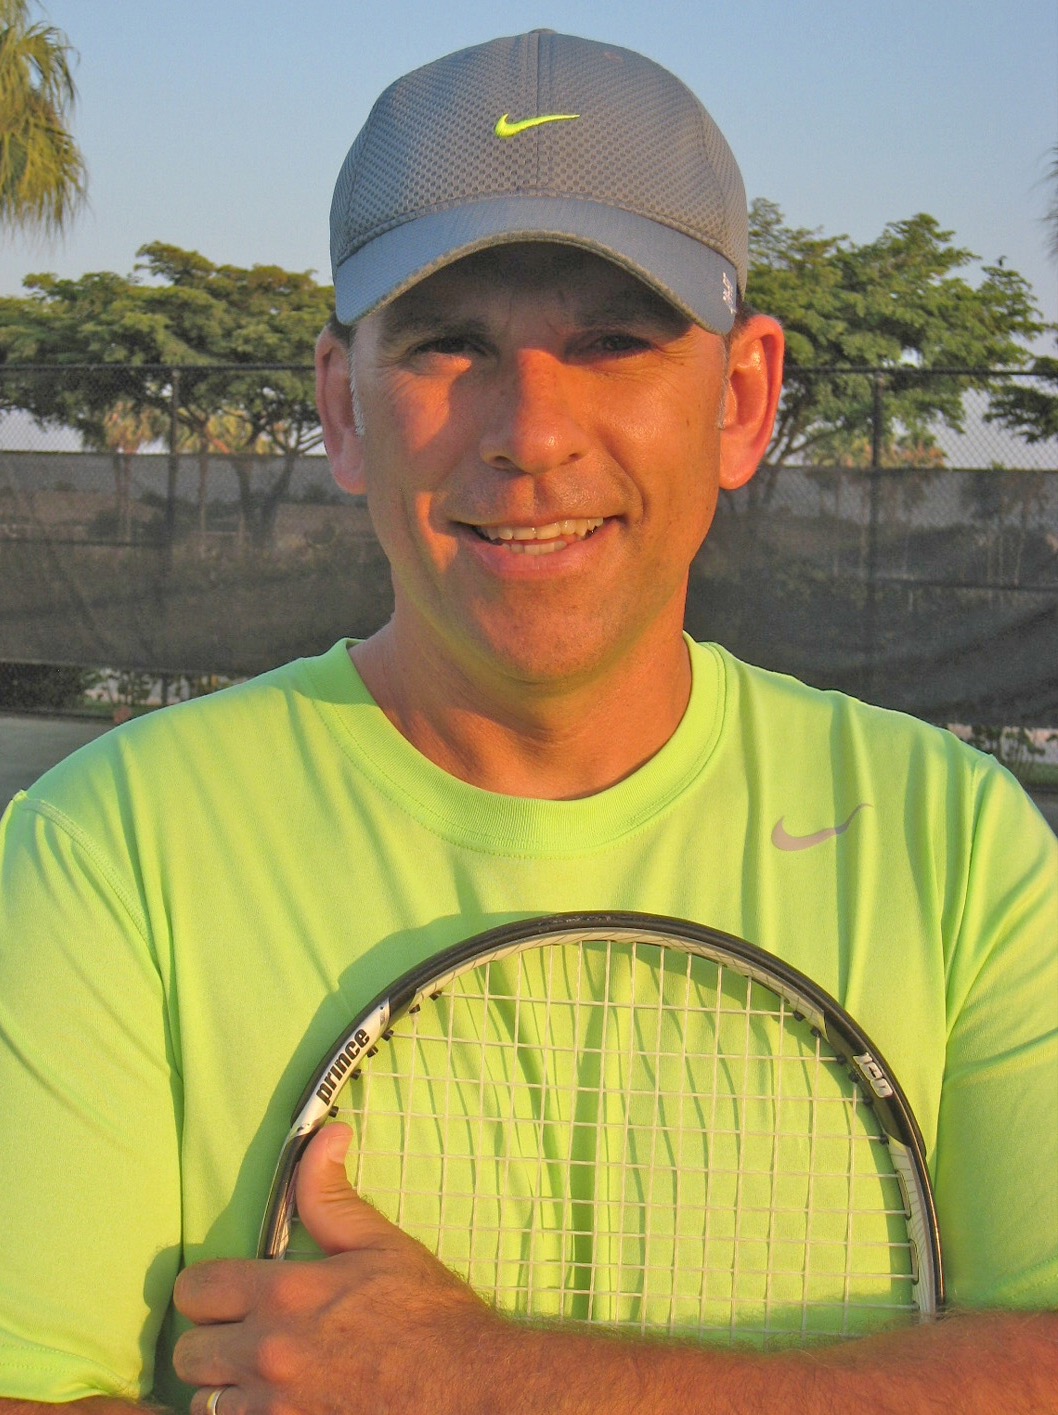 Can't Find A Tennis Coach That Fits Your Needs?